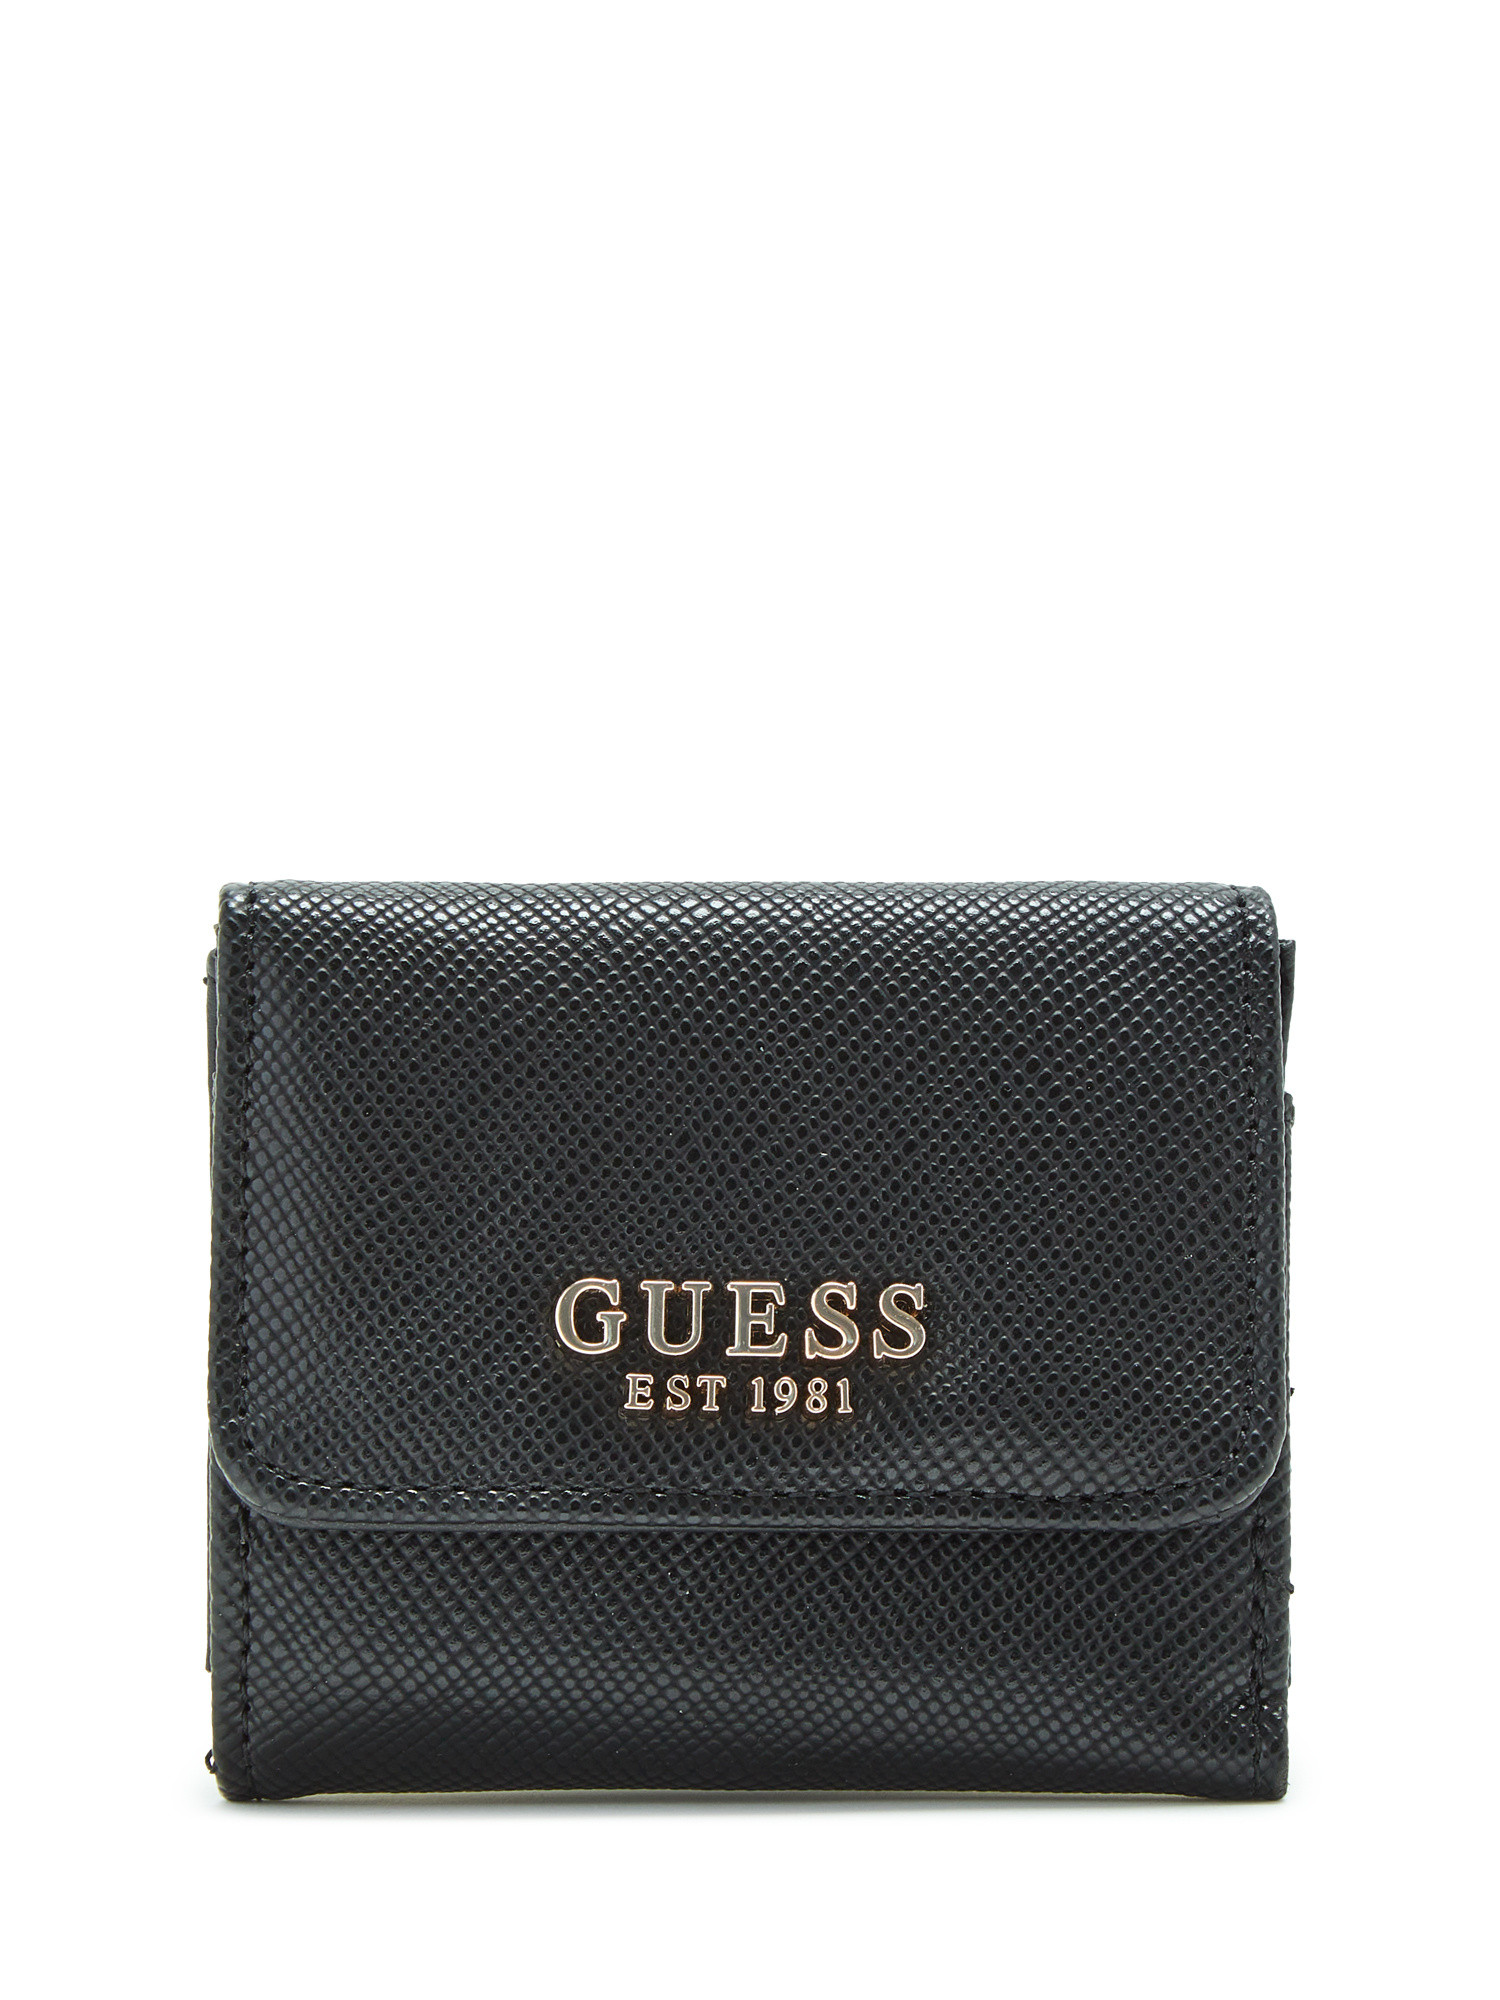 Guess - Wallet with logo, Black, large image number 0